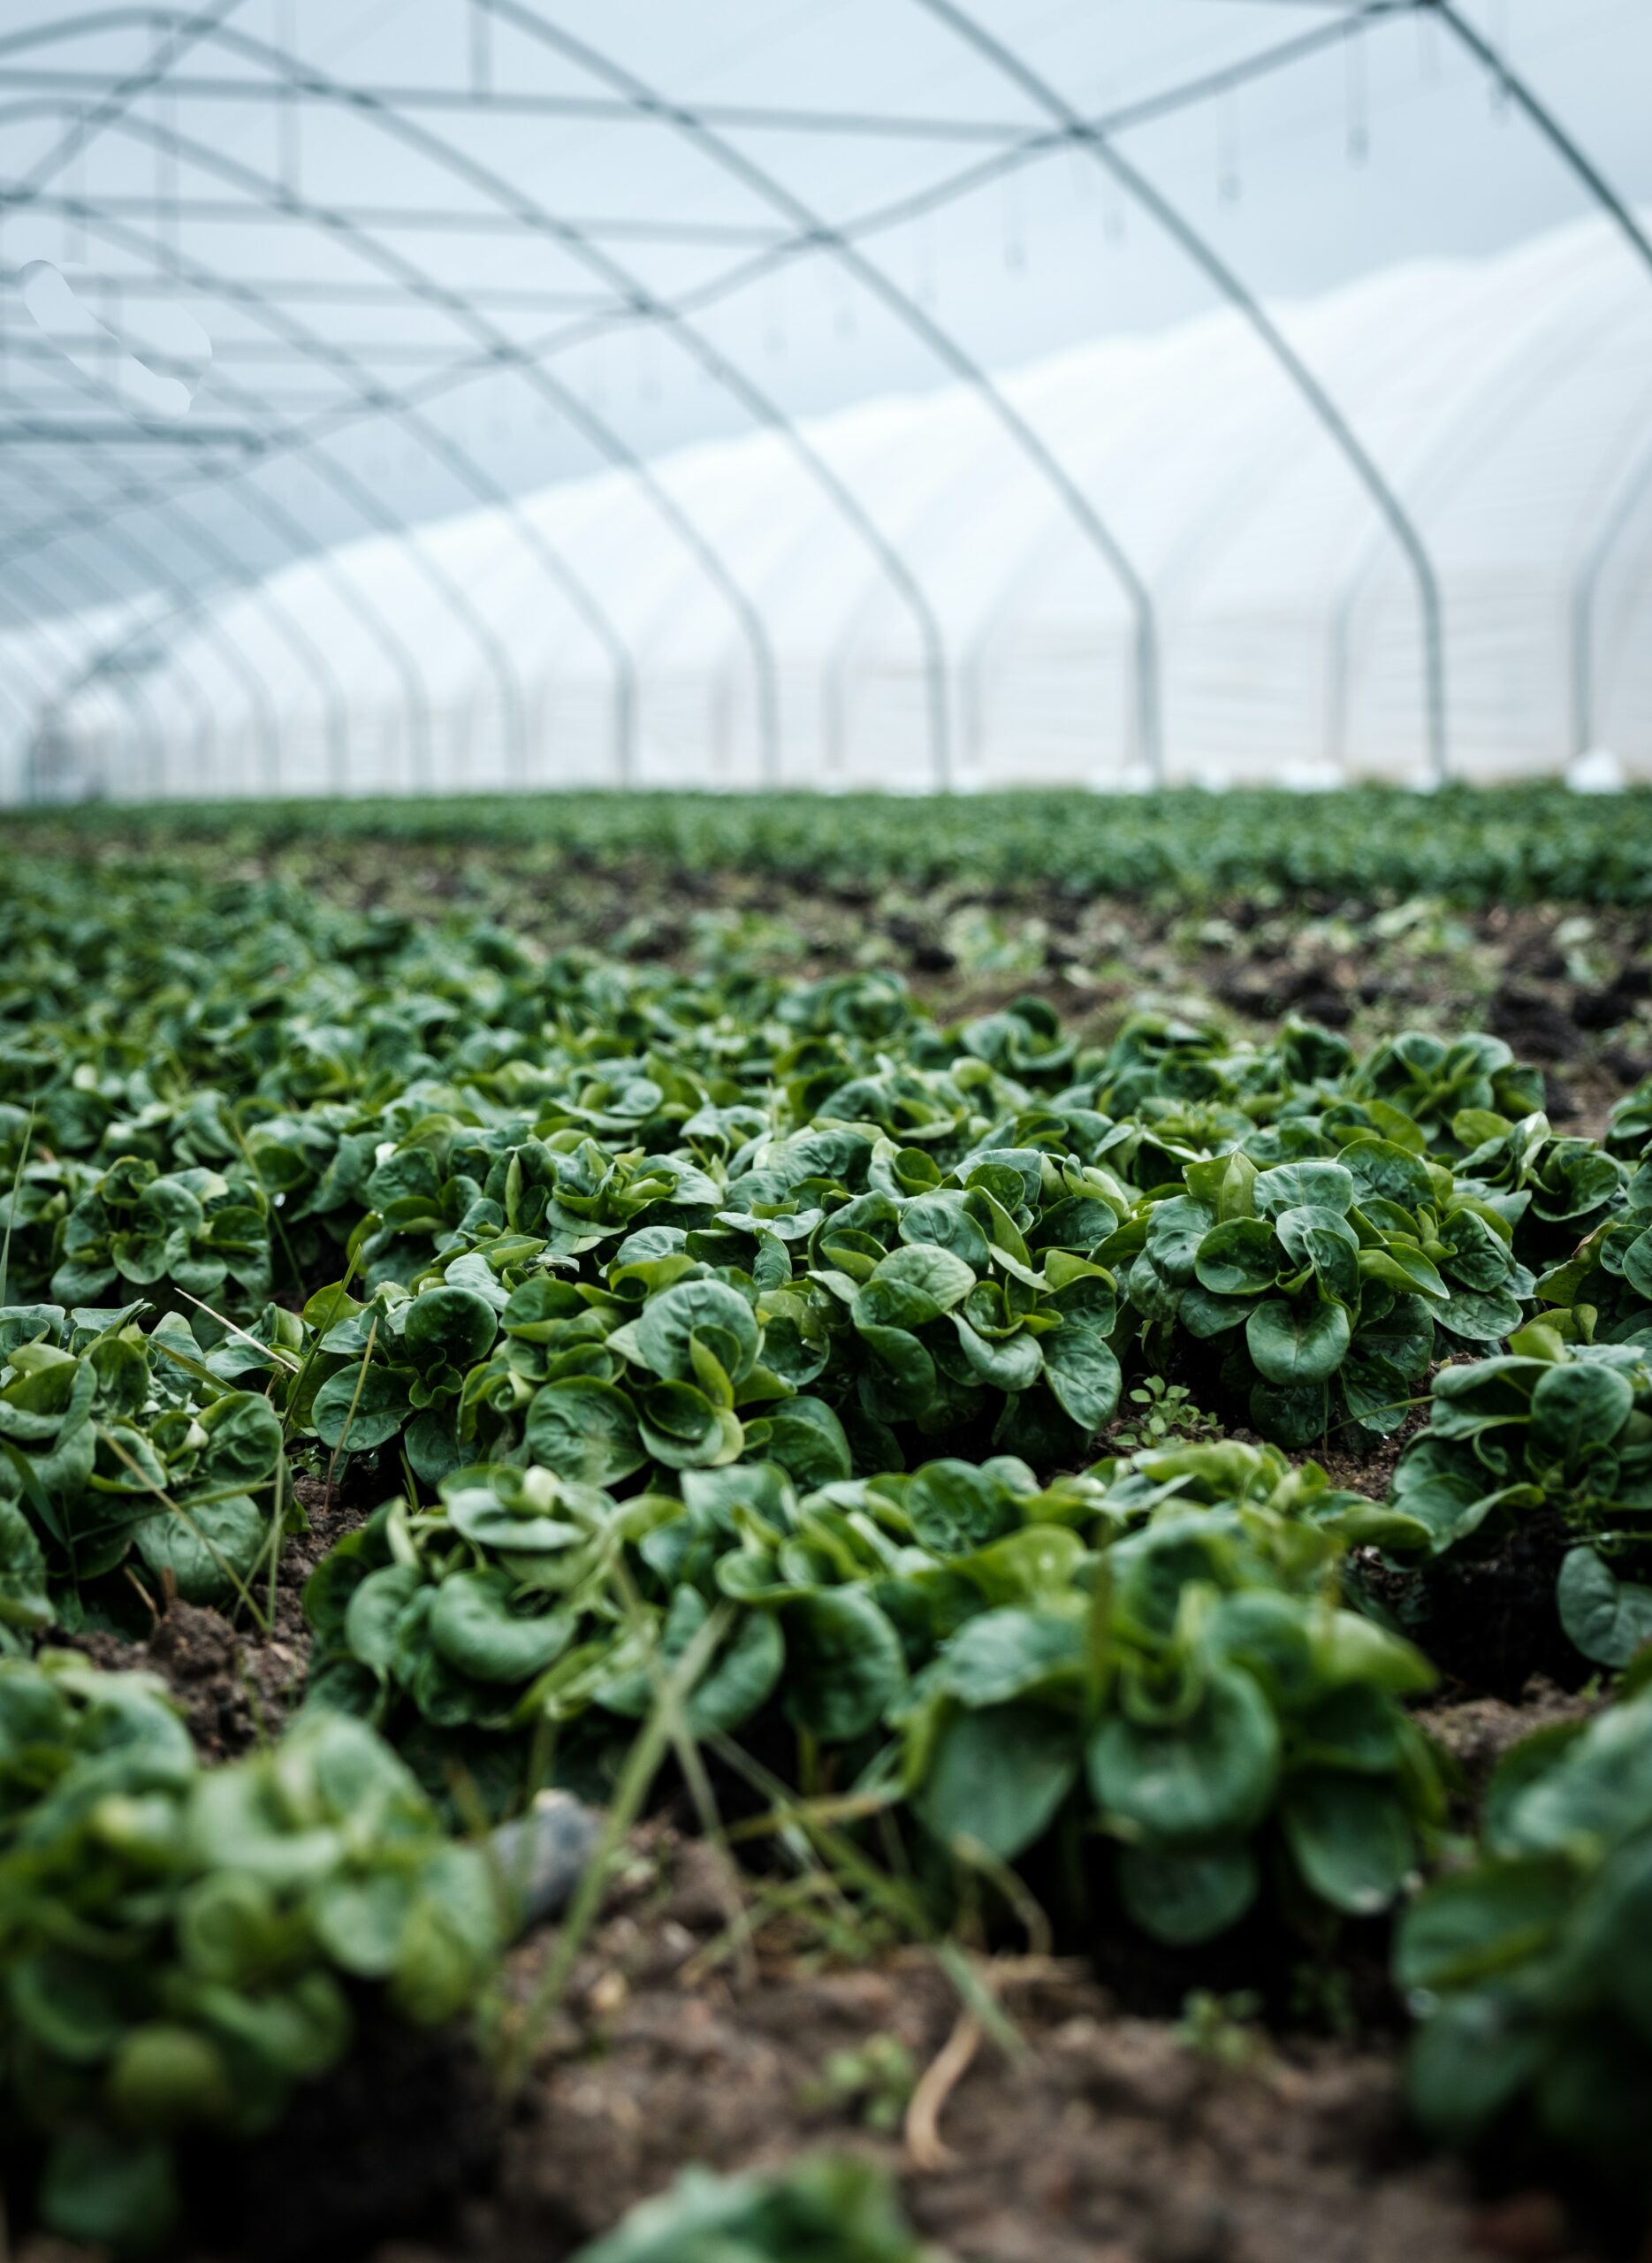 Choosing the Right Nutrients - Greenhouse with Lettuce